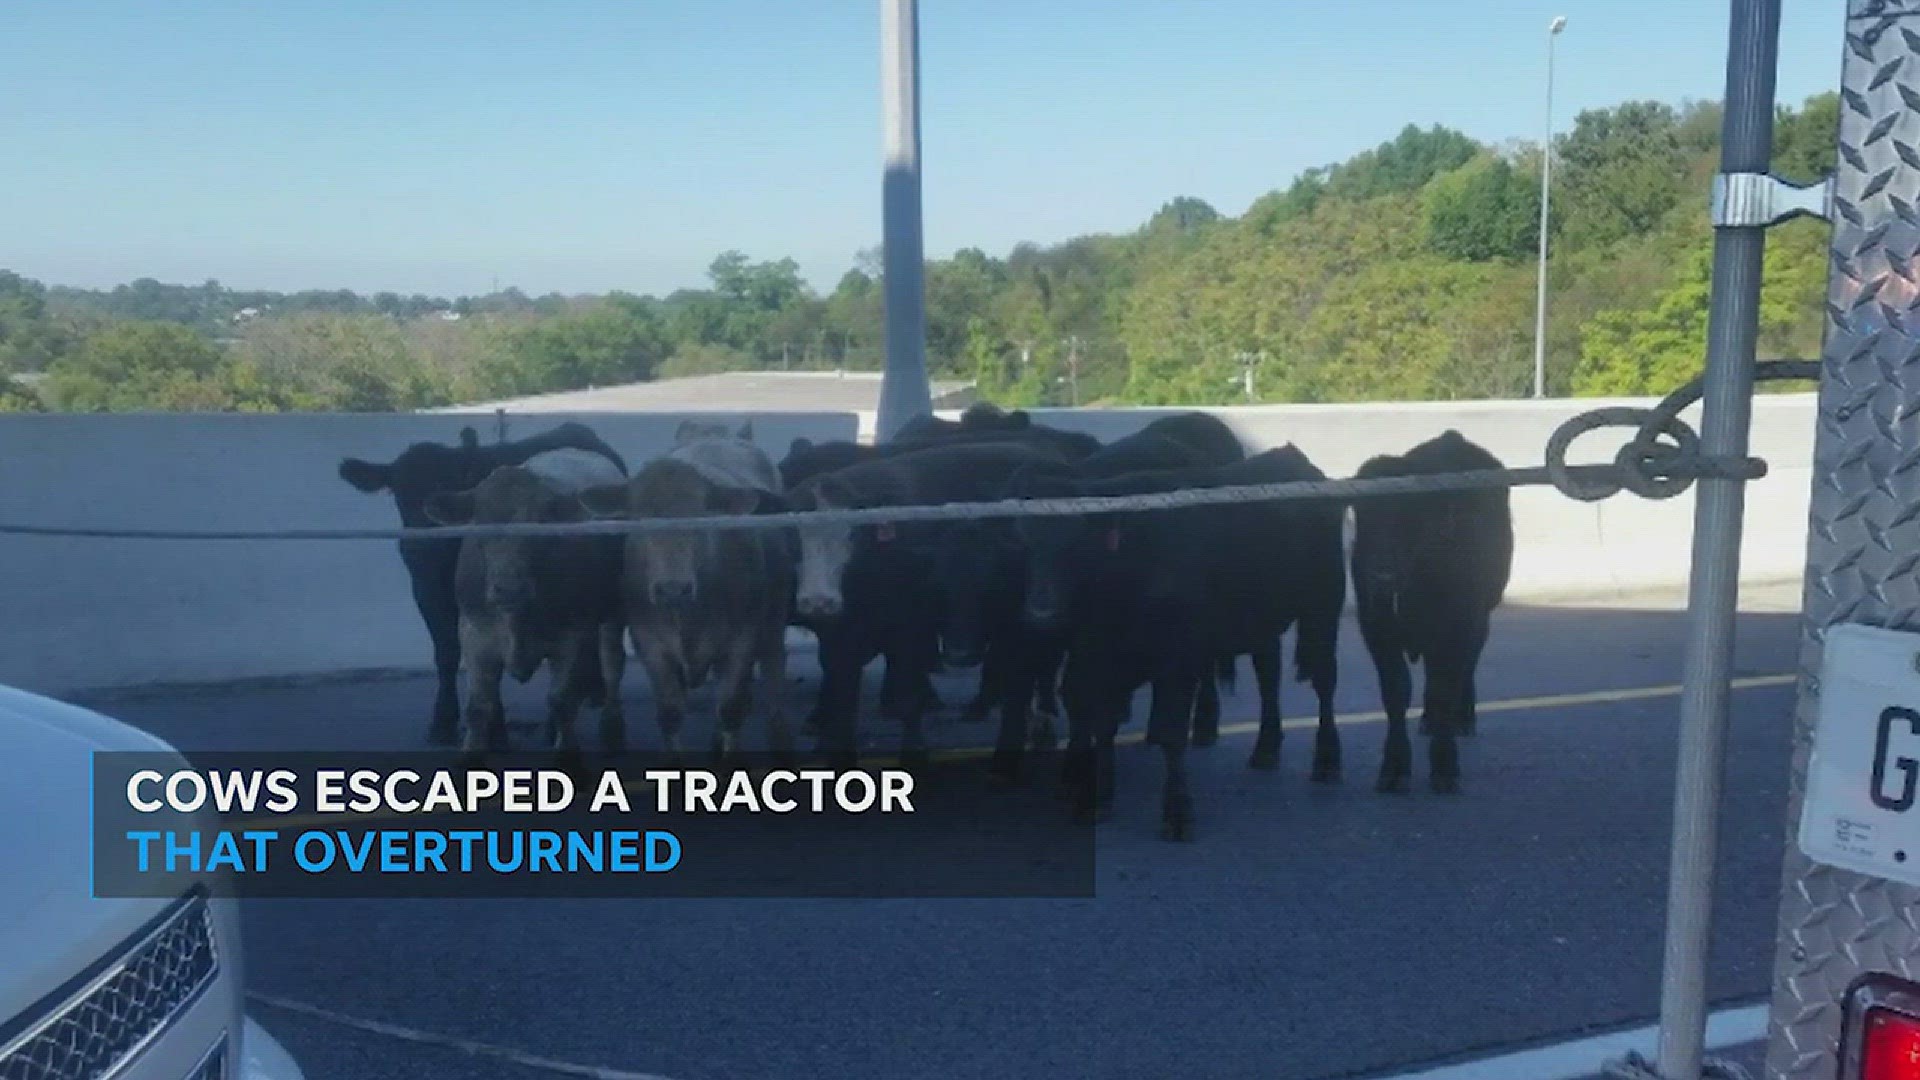 10/13/17: A truck transporting cows overturned on Briley Parkway in Nashville, Tennessee